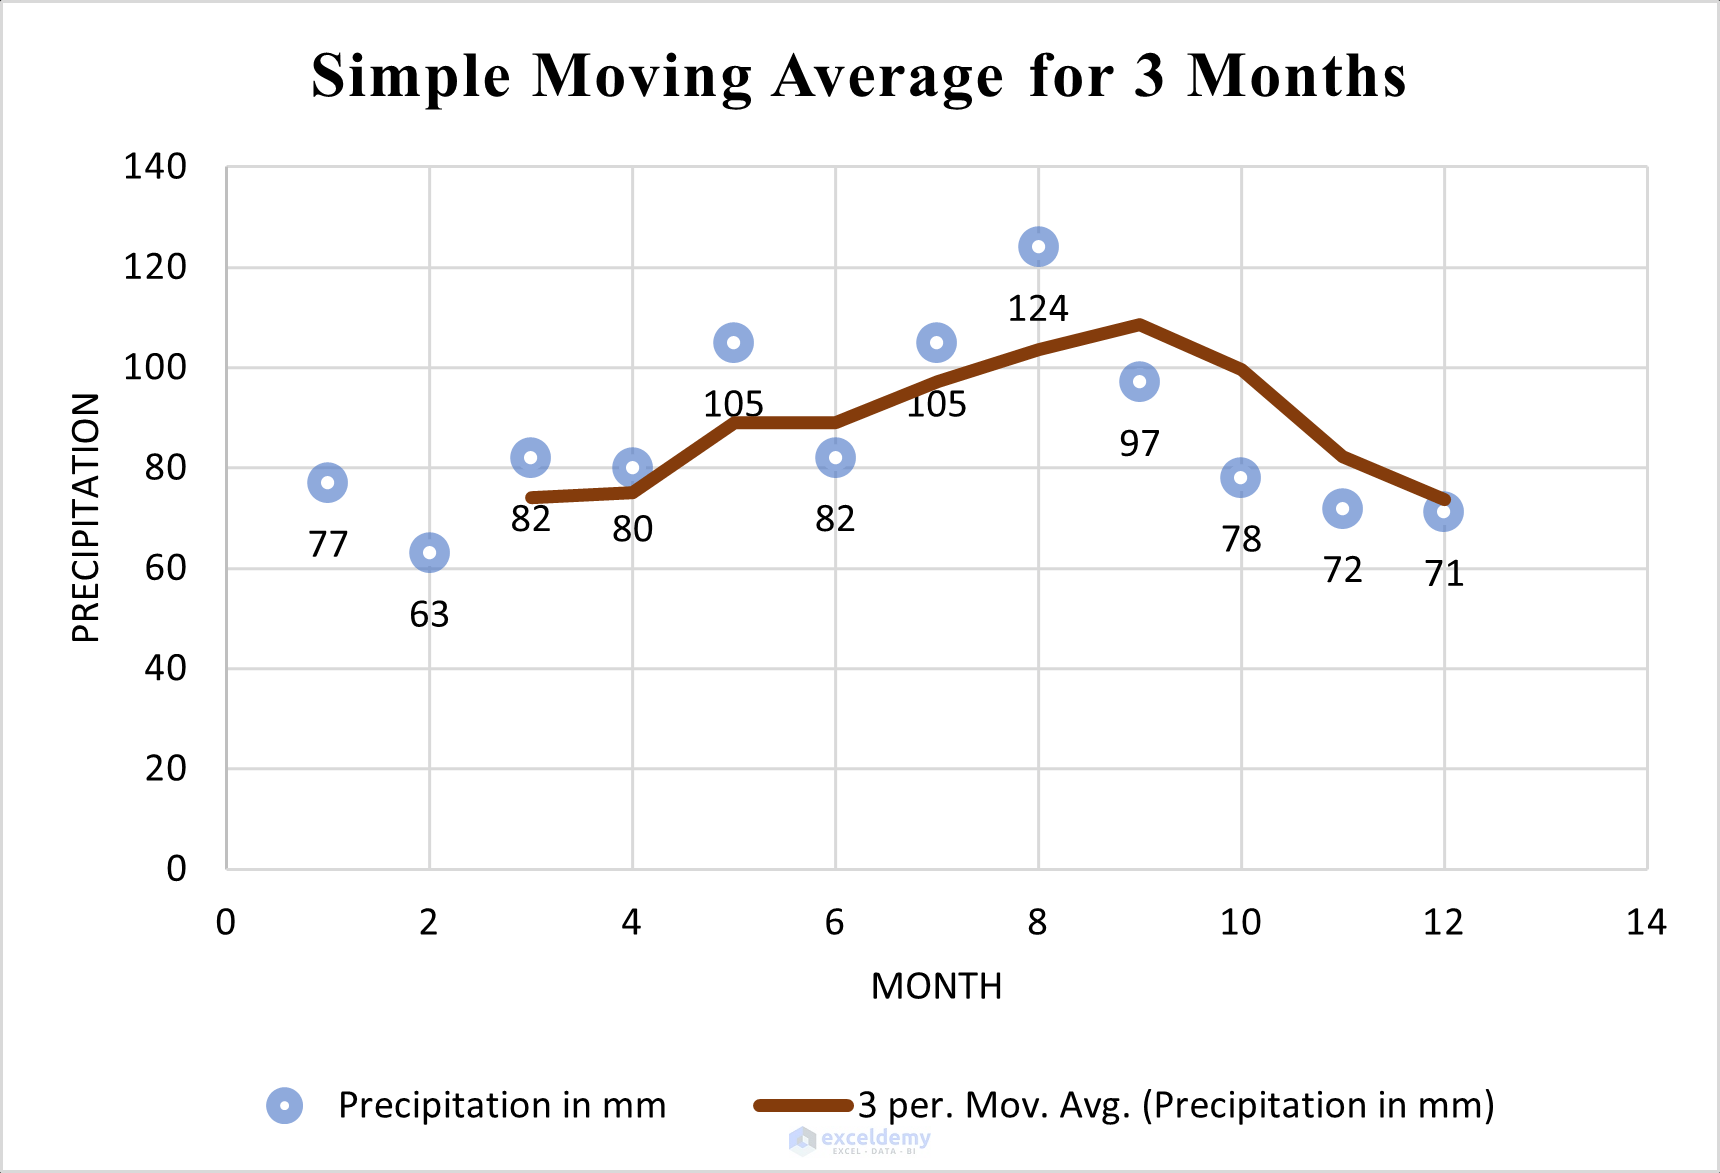 Generating Simple Moving Average for 3-months